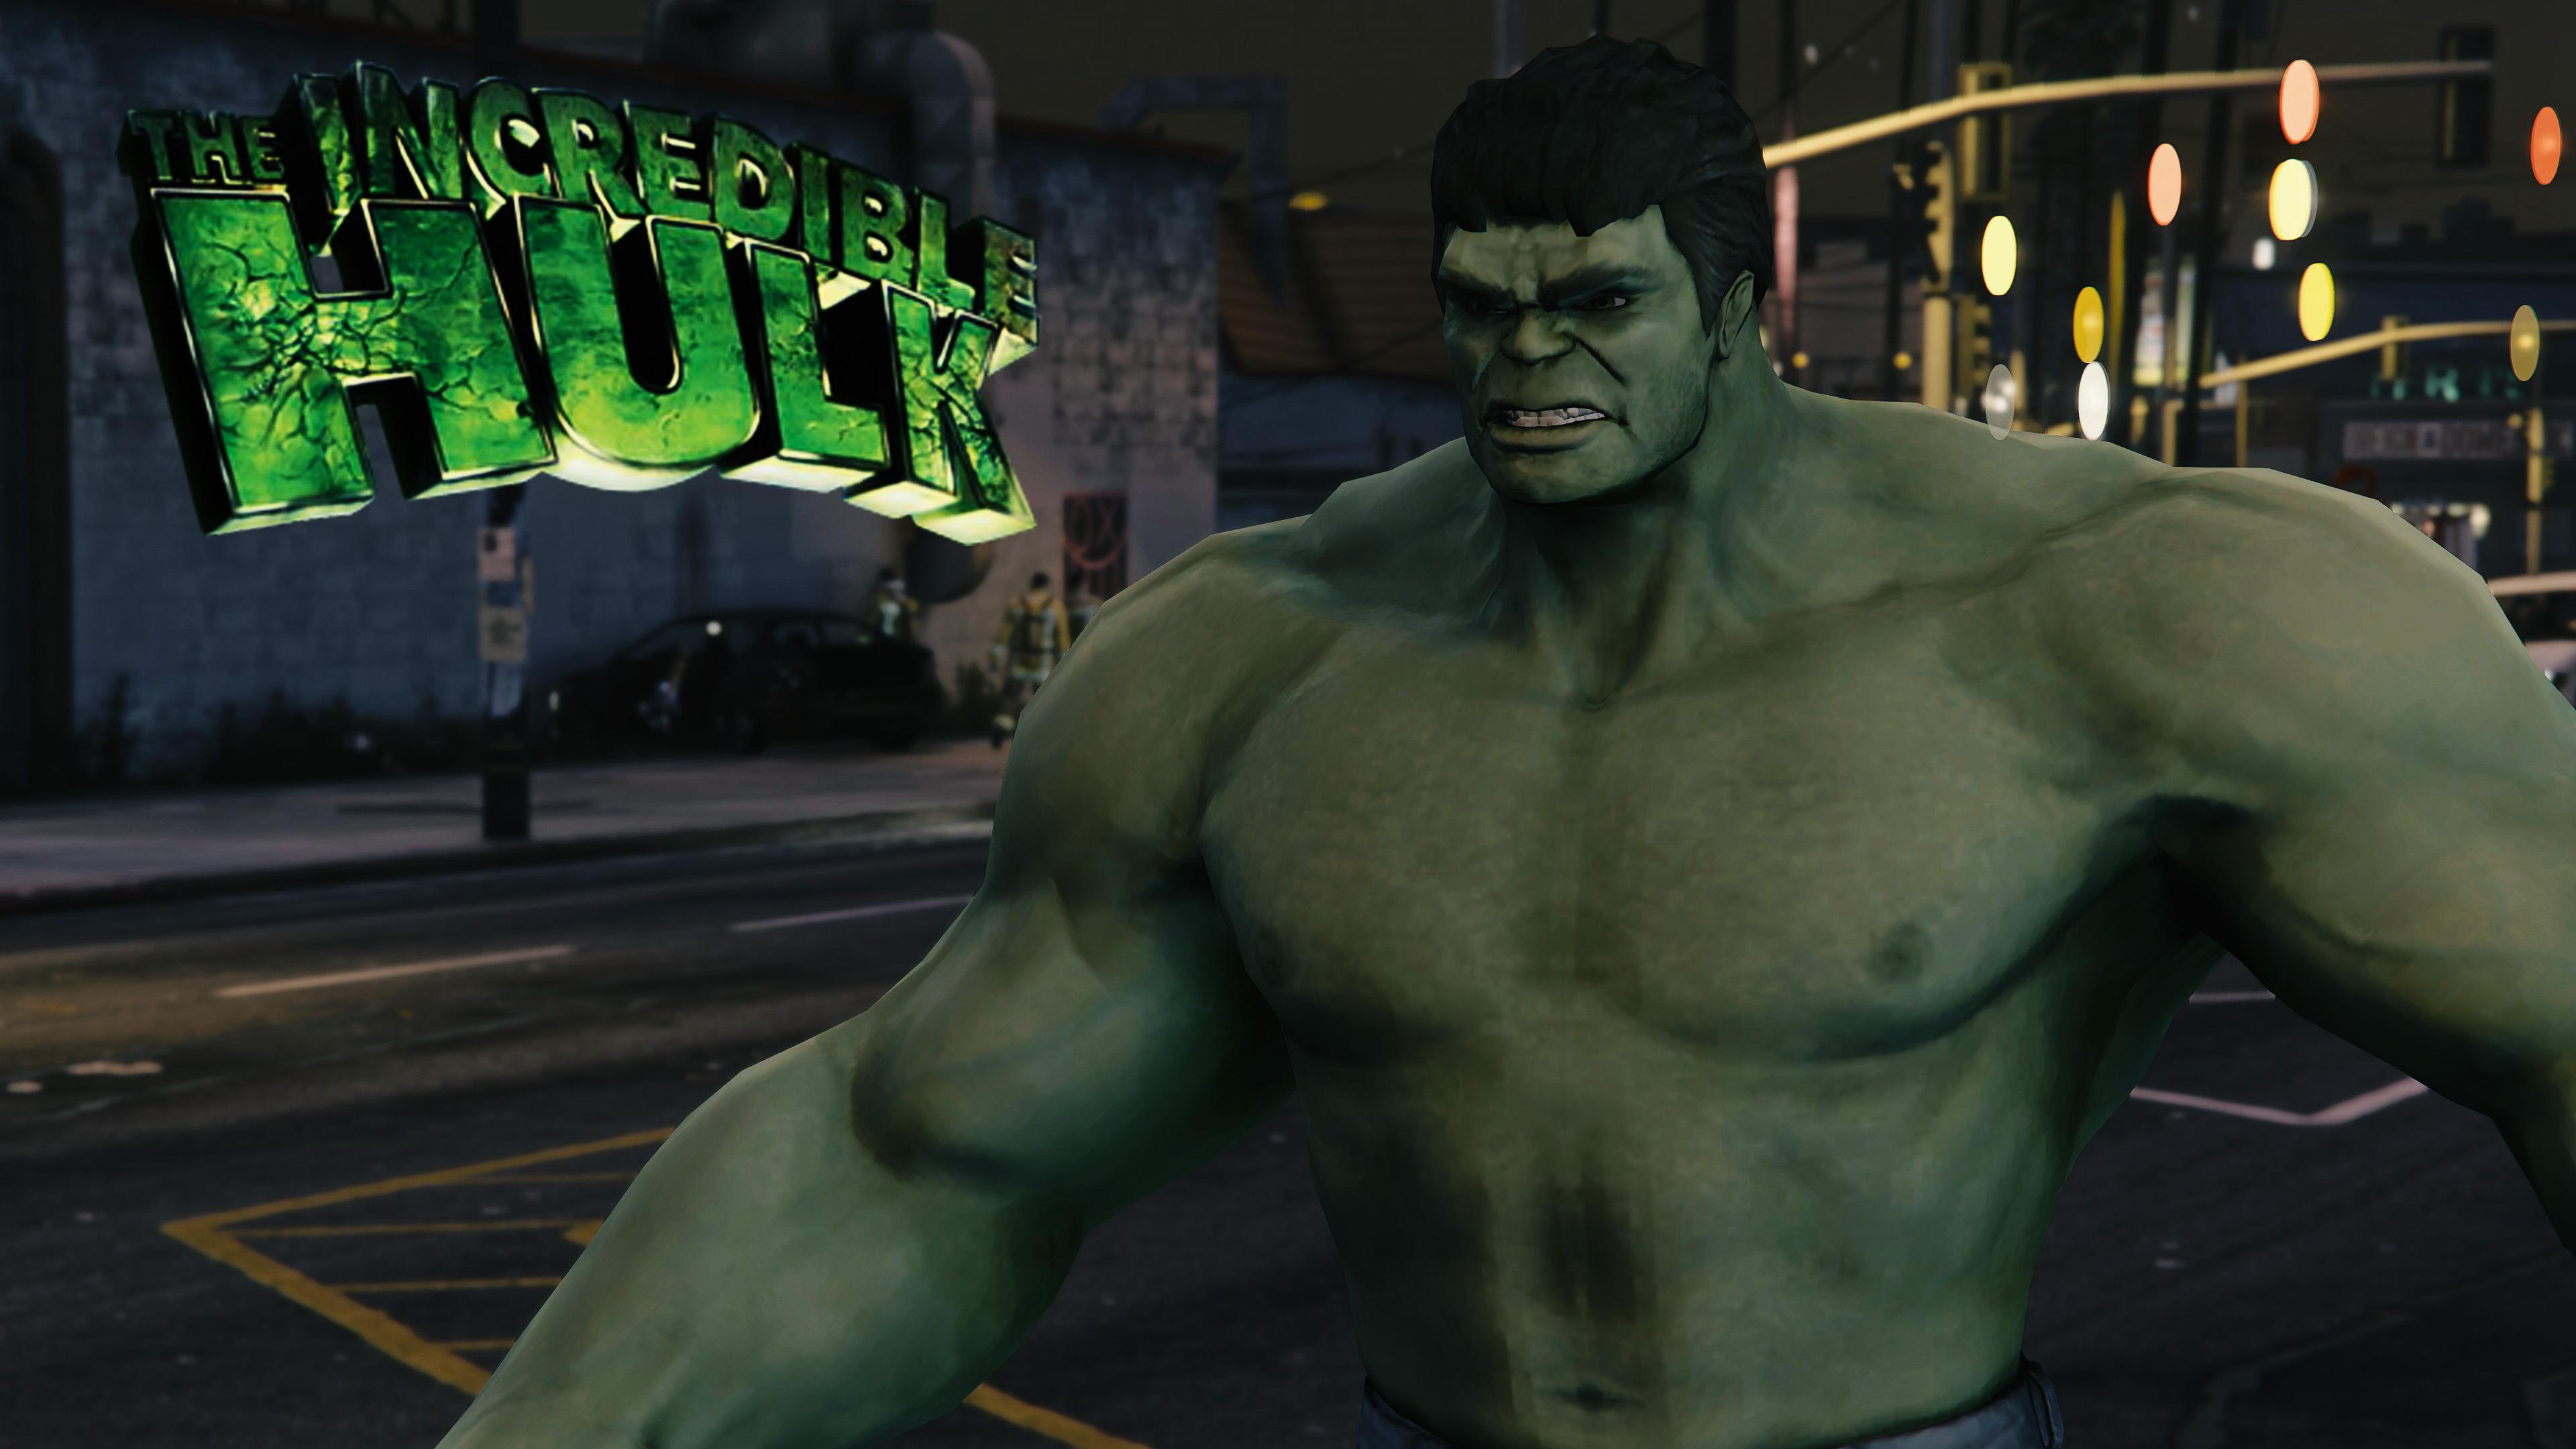 The Hulk smashes into GTA V with new mod, download available